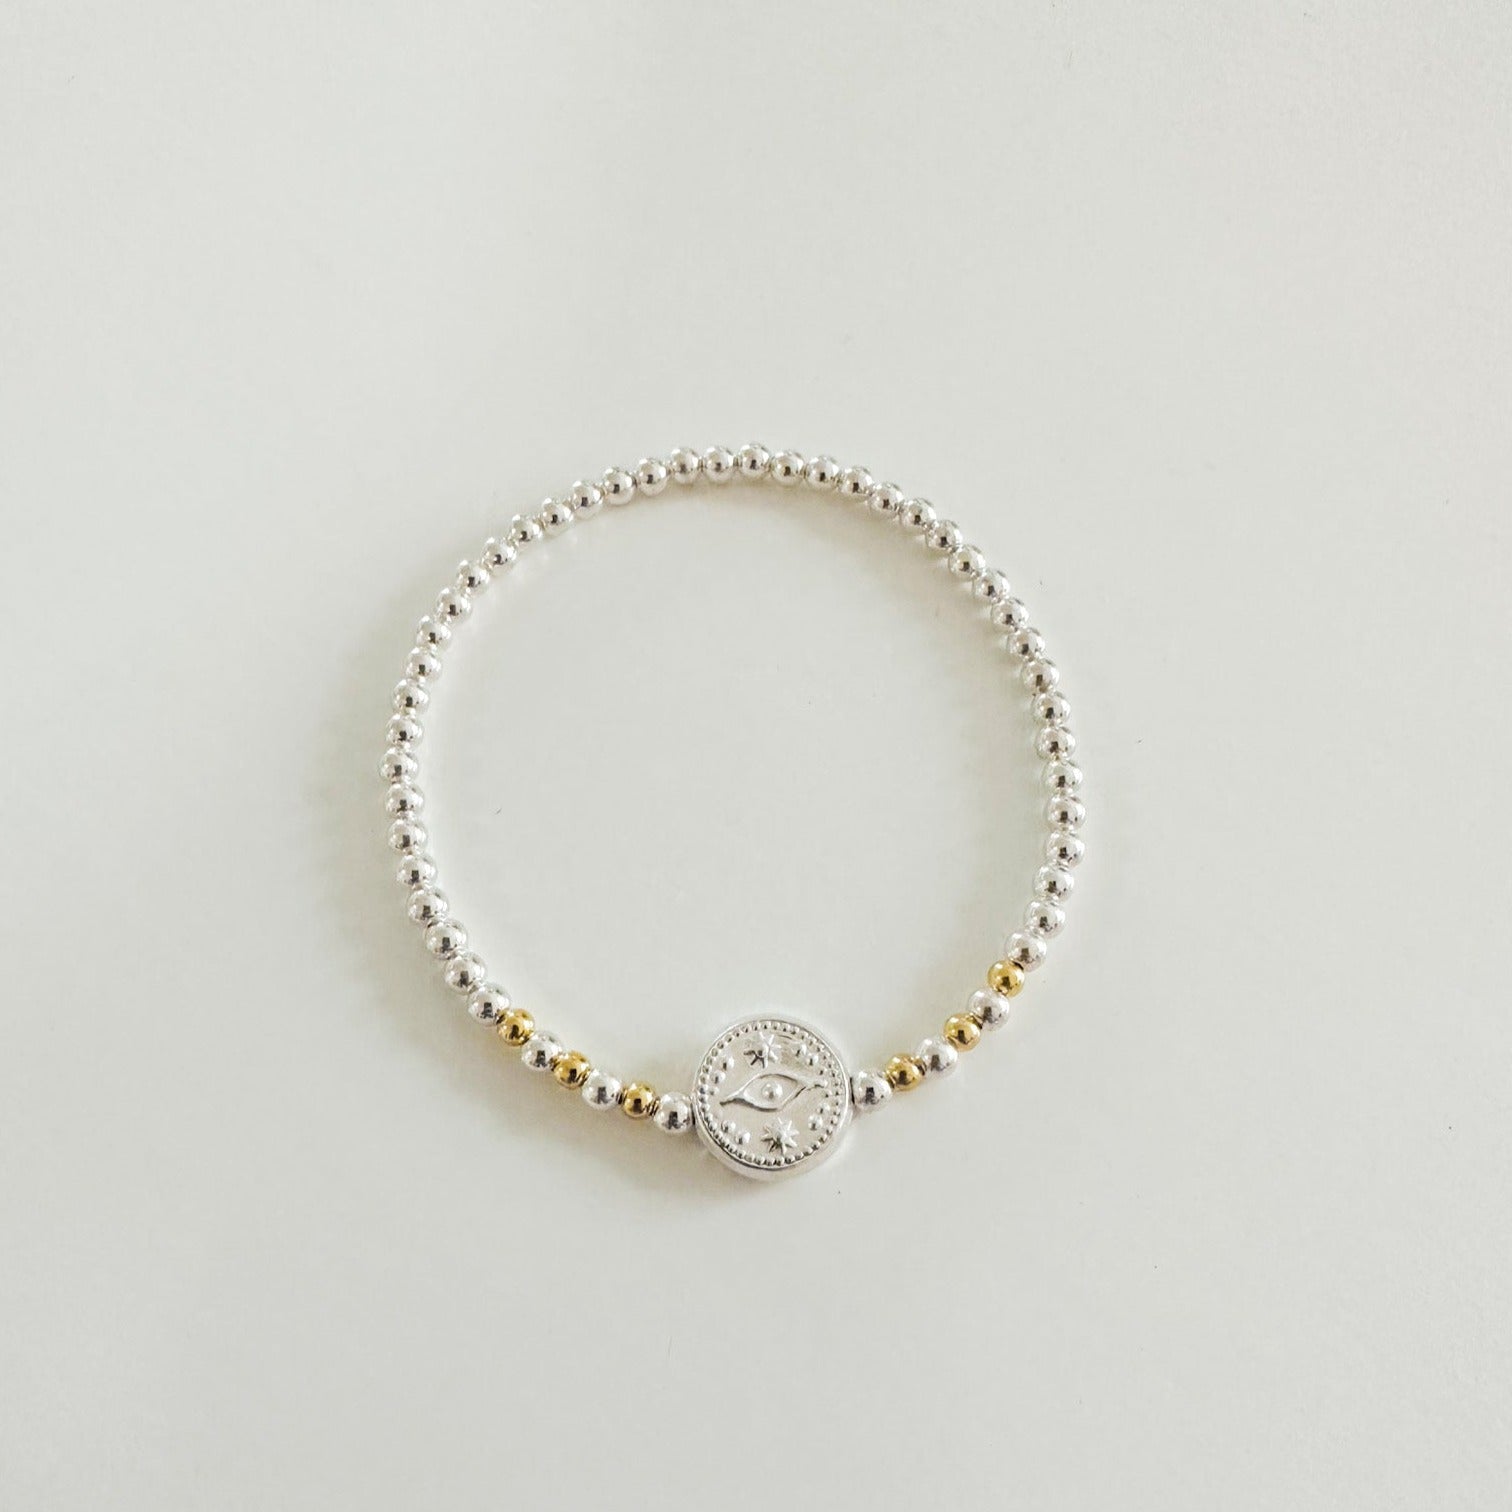 Amulet bracelet in Sterling Silver with gold beads and evil eye charm